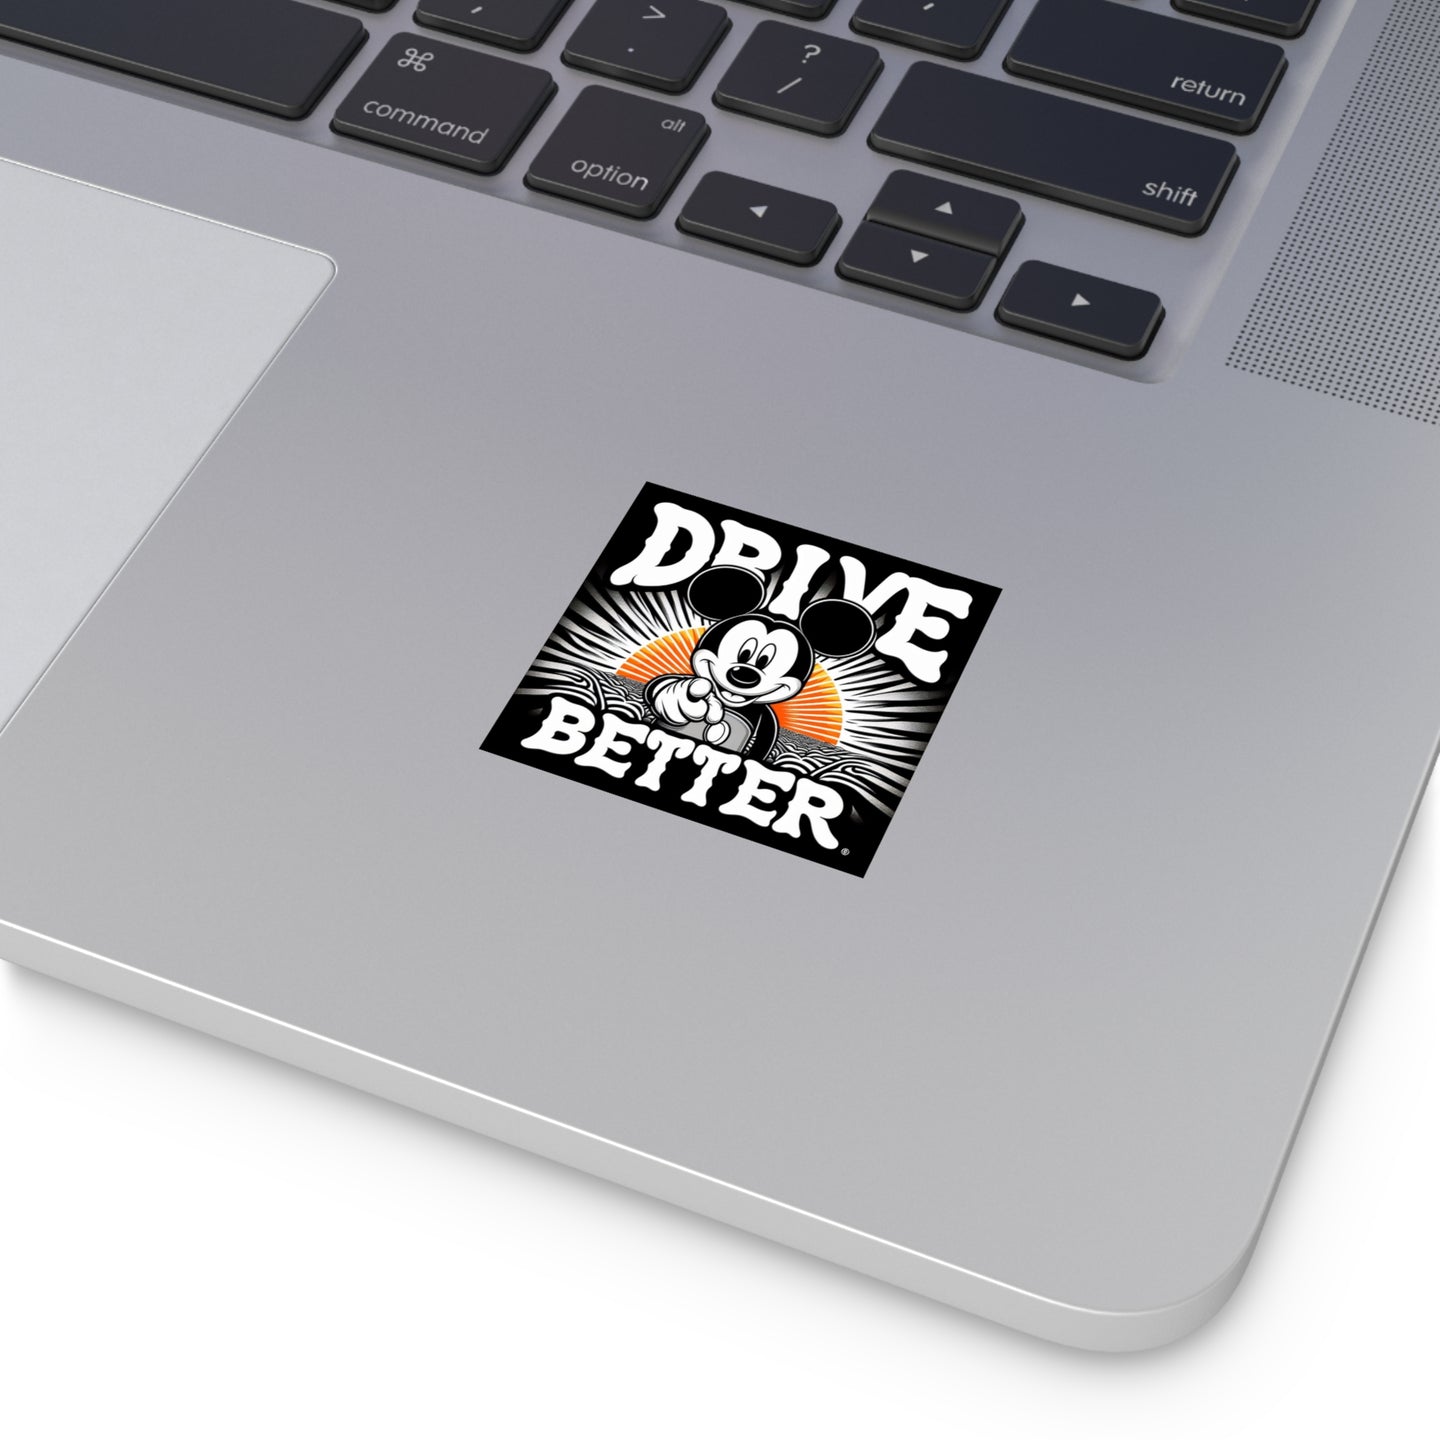 Drive Better Old School 8 X 8 Inch Square Vinyl Stickers